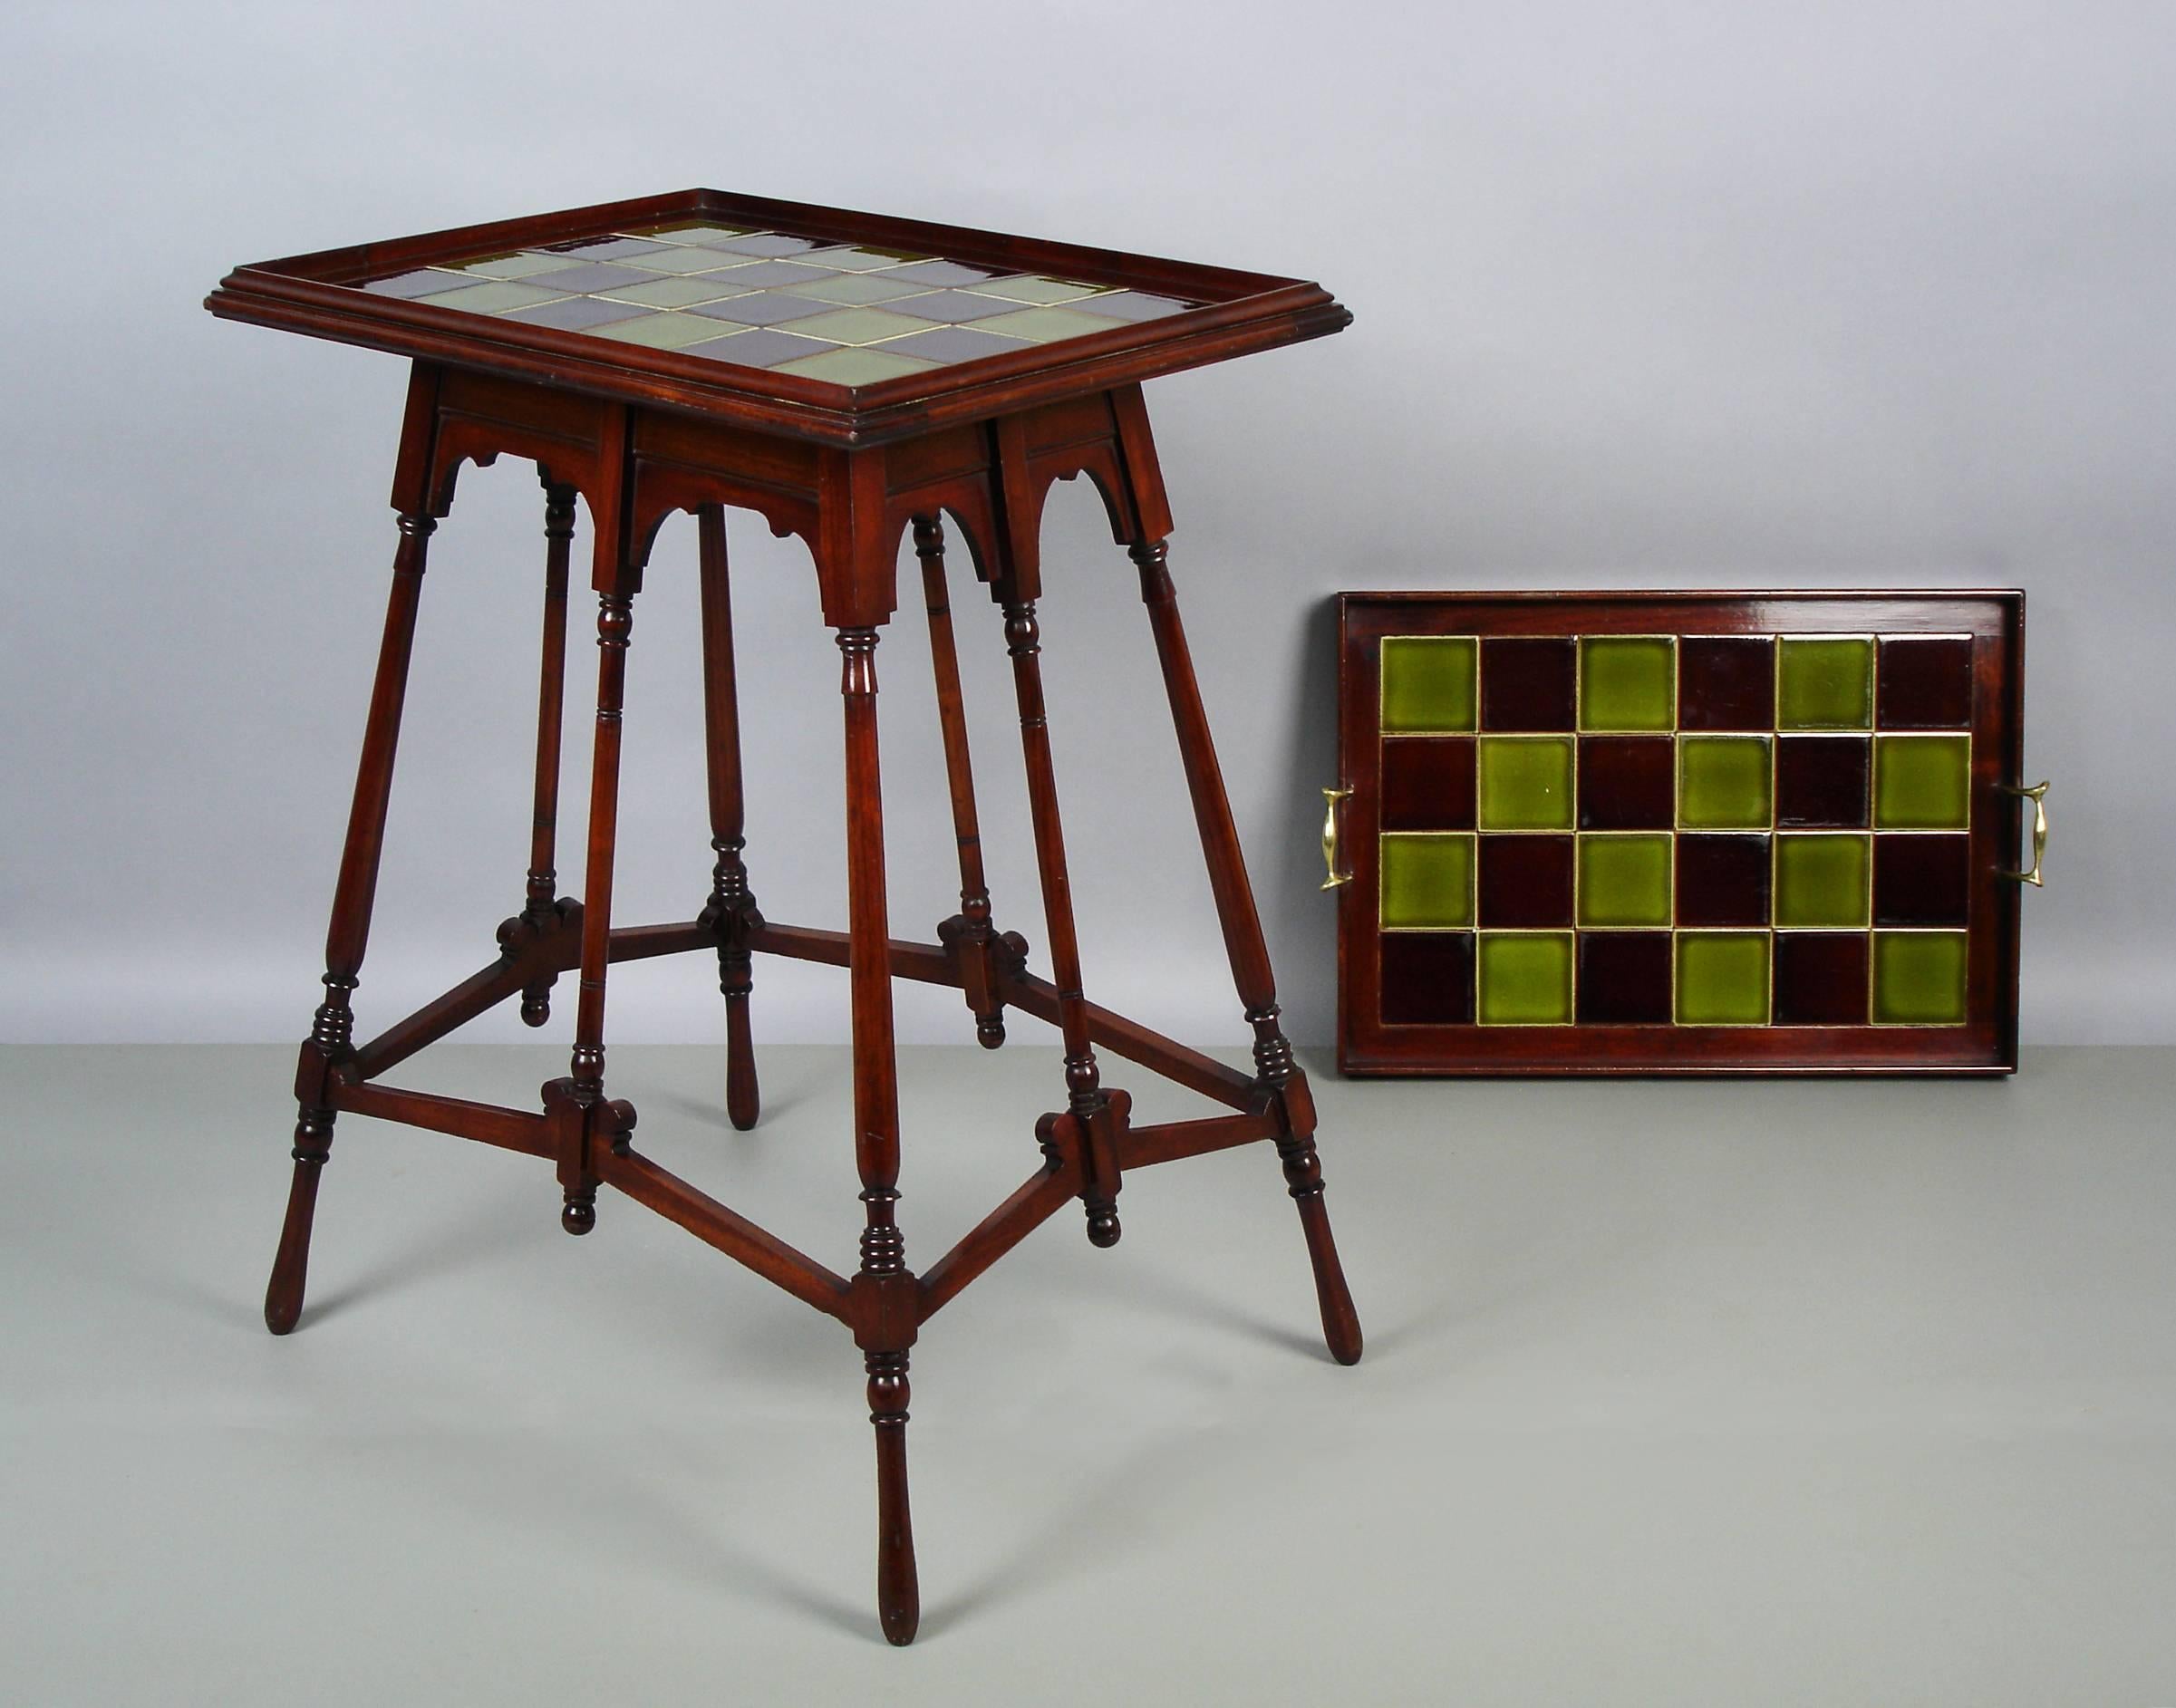 A late 19th century, Aesthetic Movement tea table with its tray. A brown and green tiles top supported upon four mahogany turned legs splayed with angular stretchers .A tray fitted to the table with a tiles top, a mahogany frame and bronze handles.